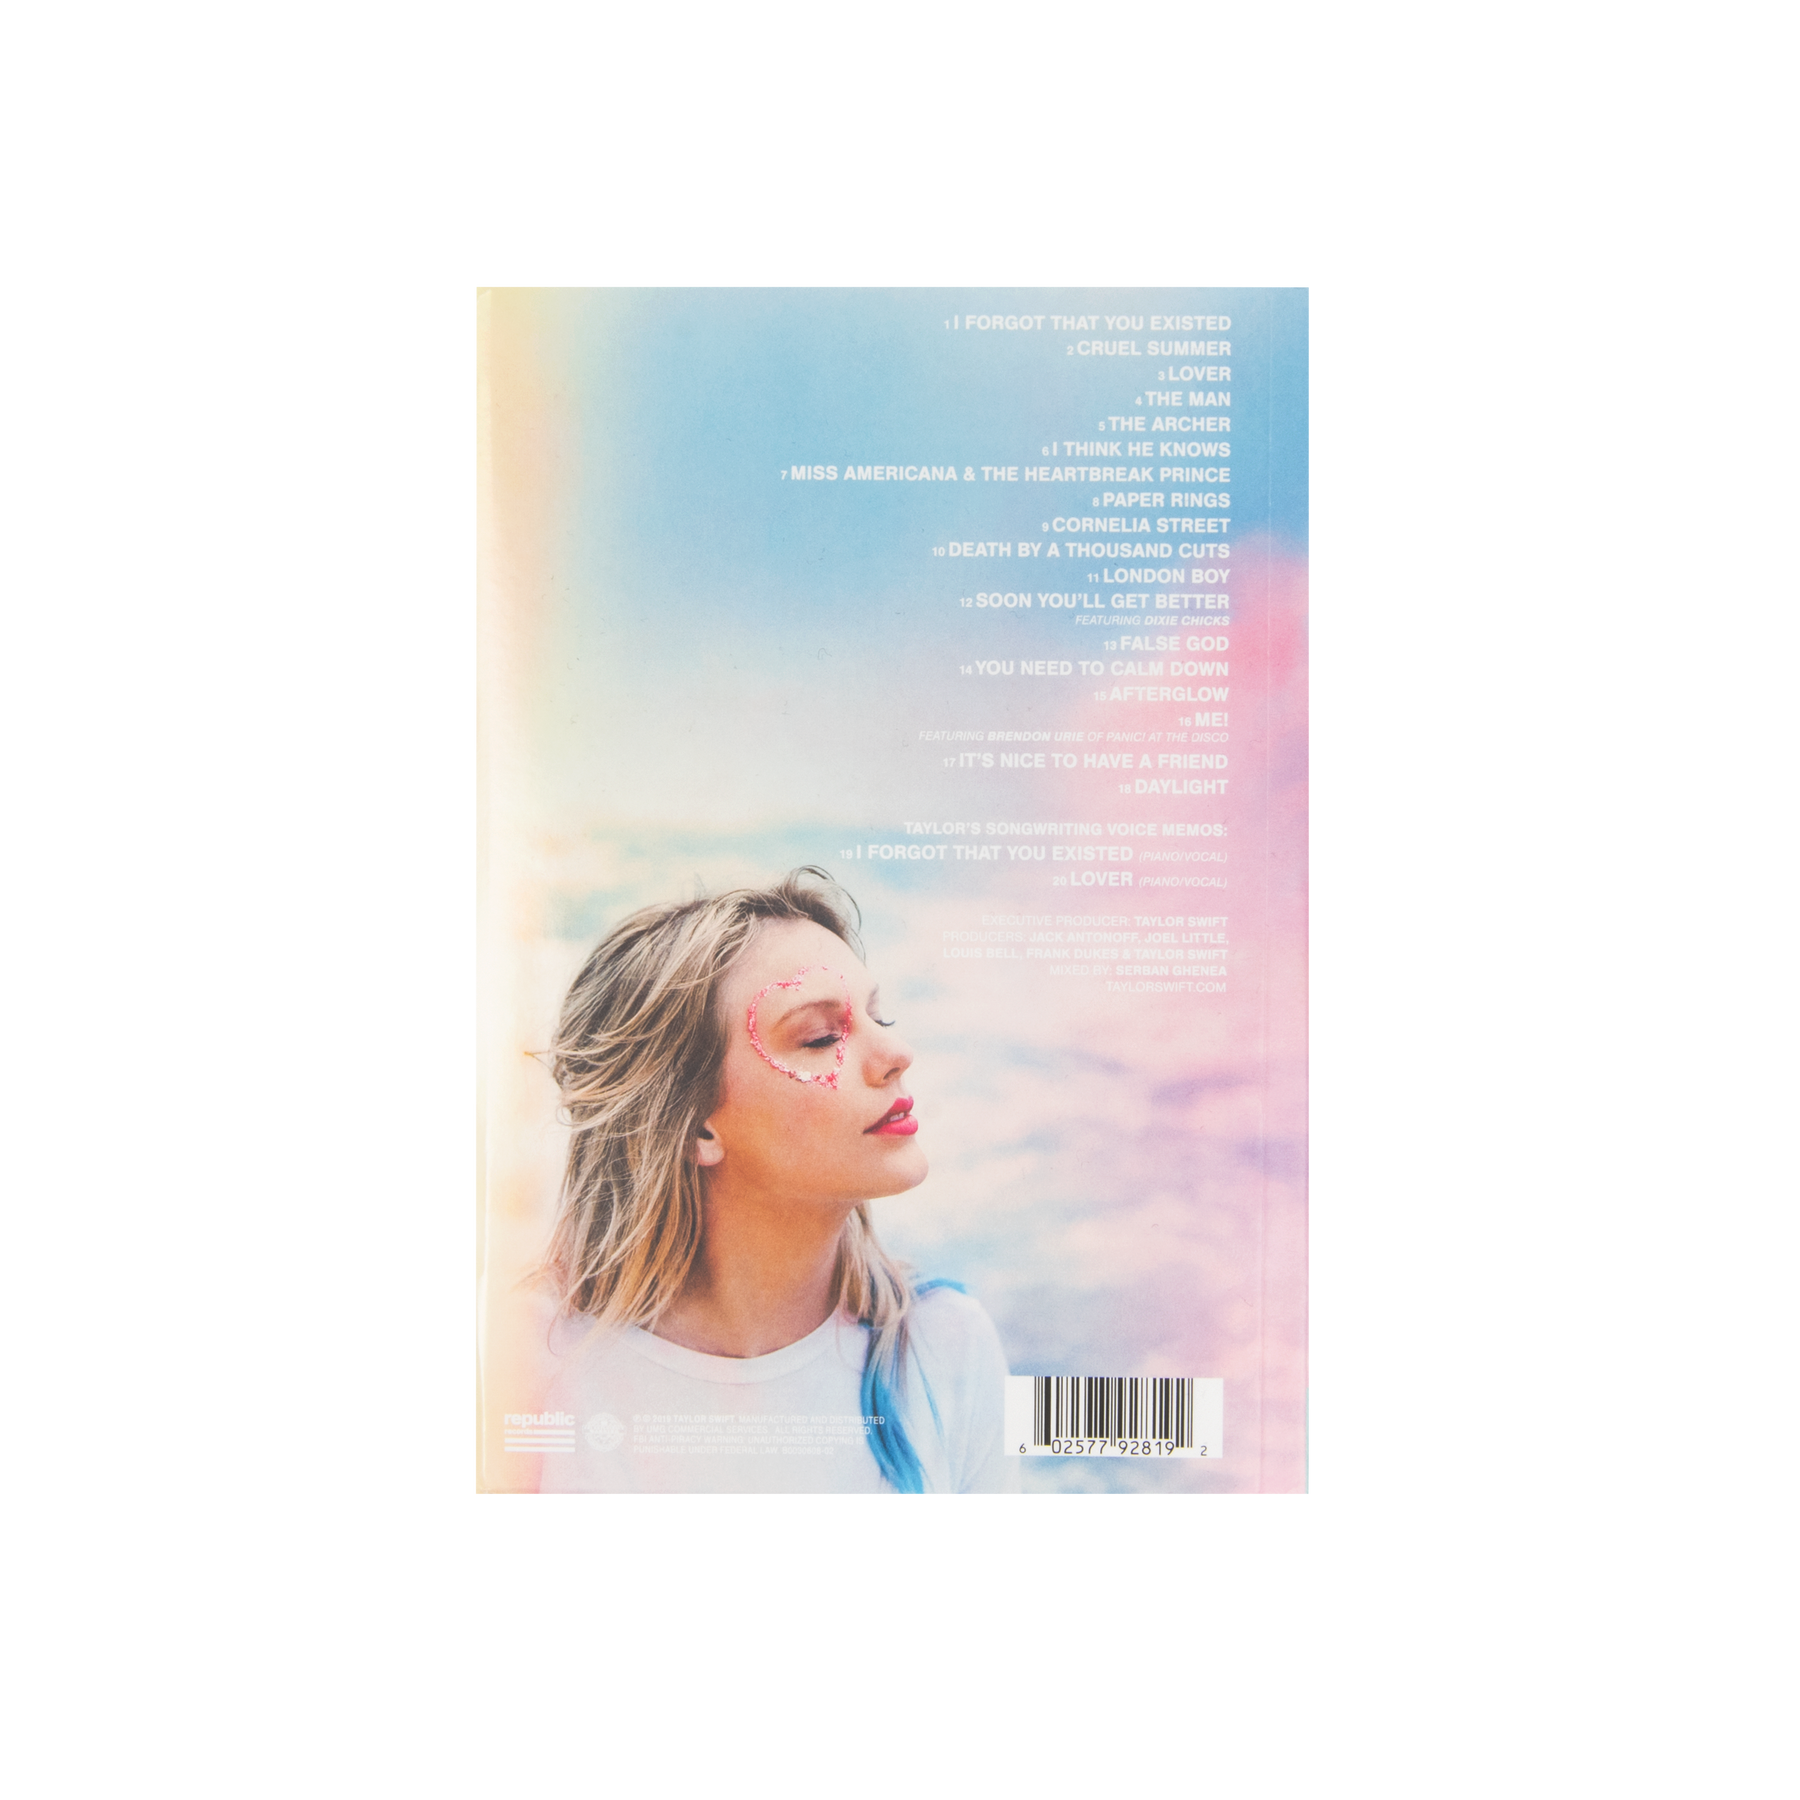 Taylor Swift: Lover CD (Deluxe Version 1)